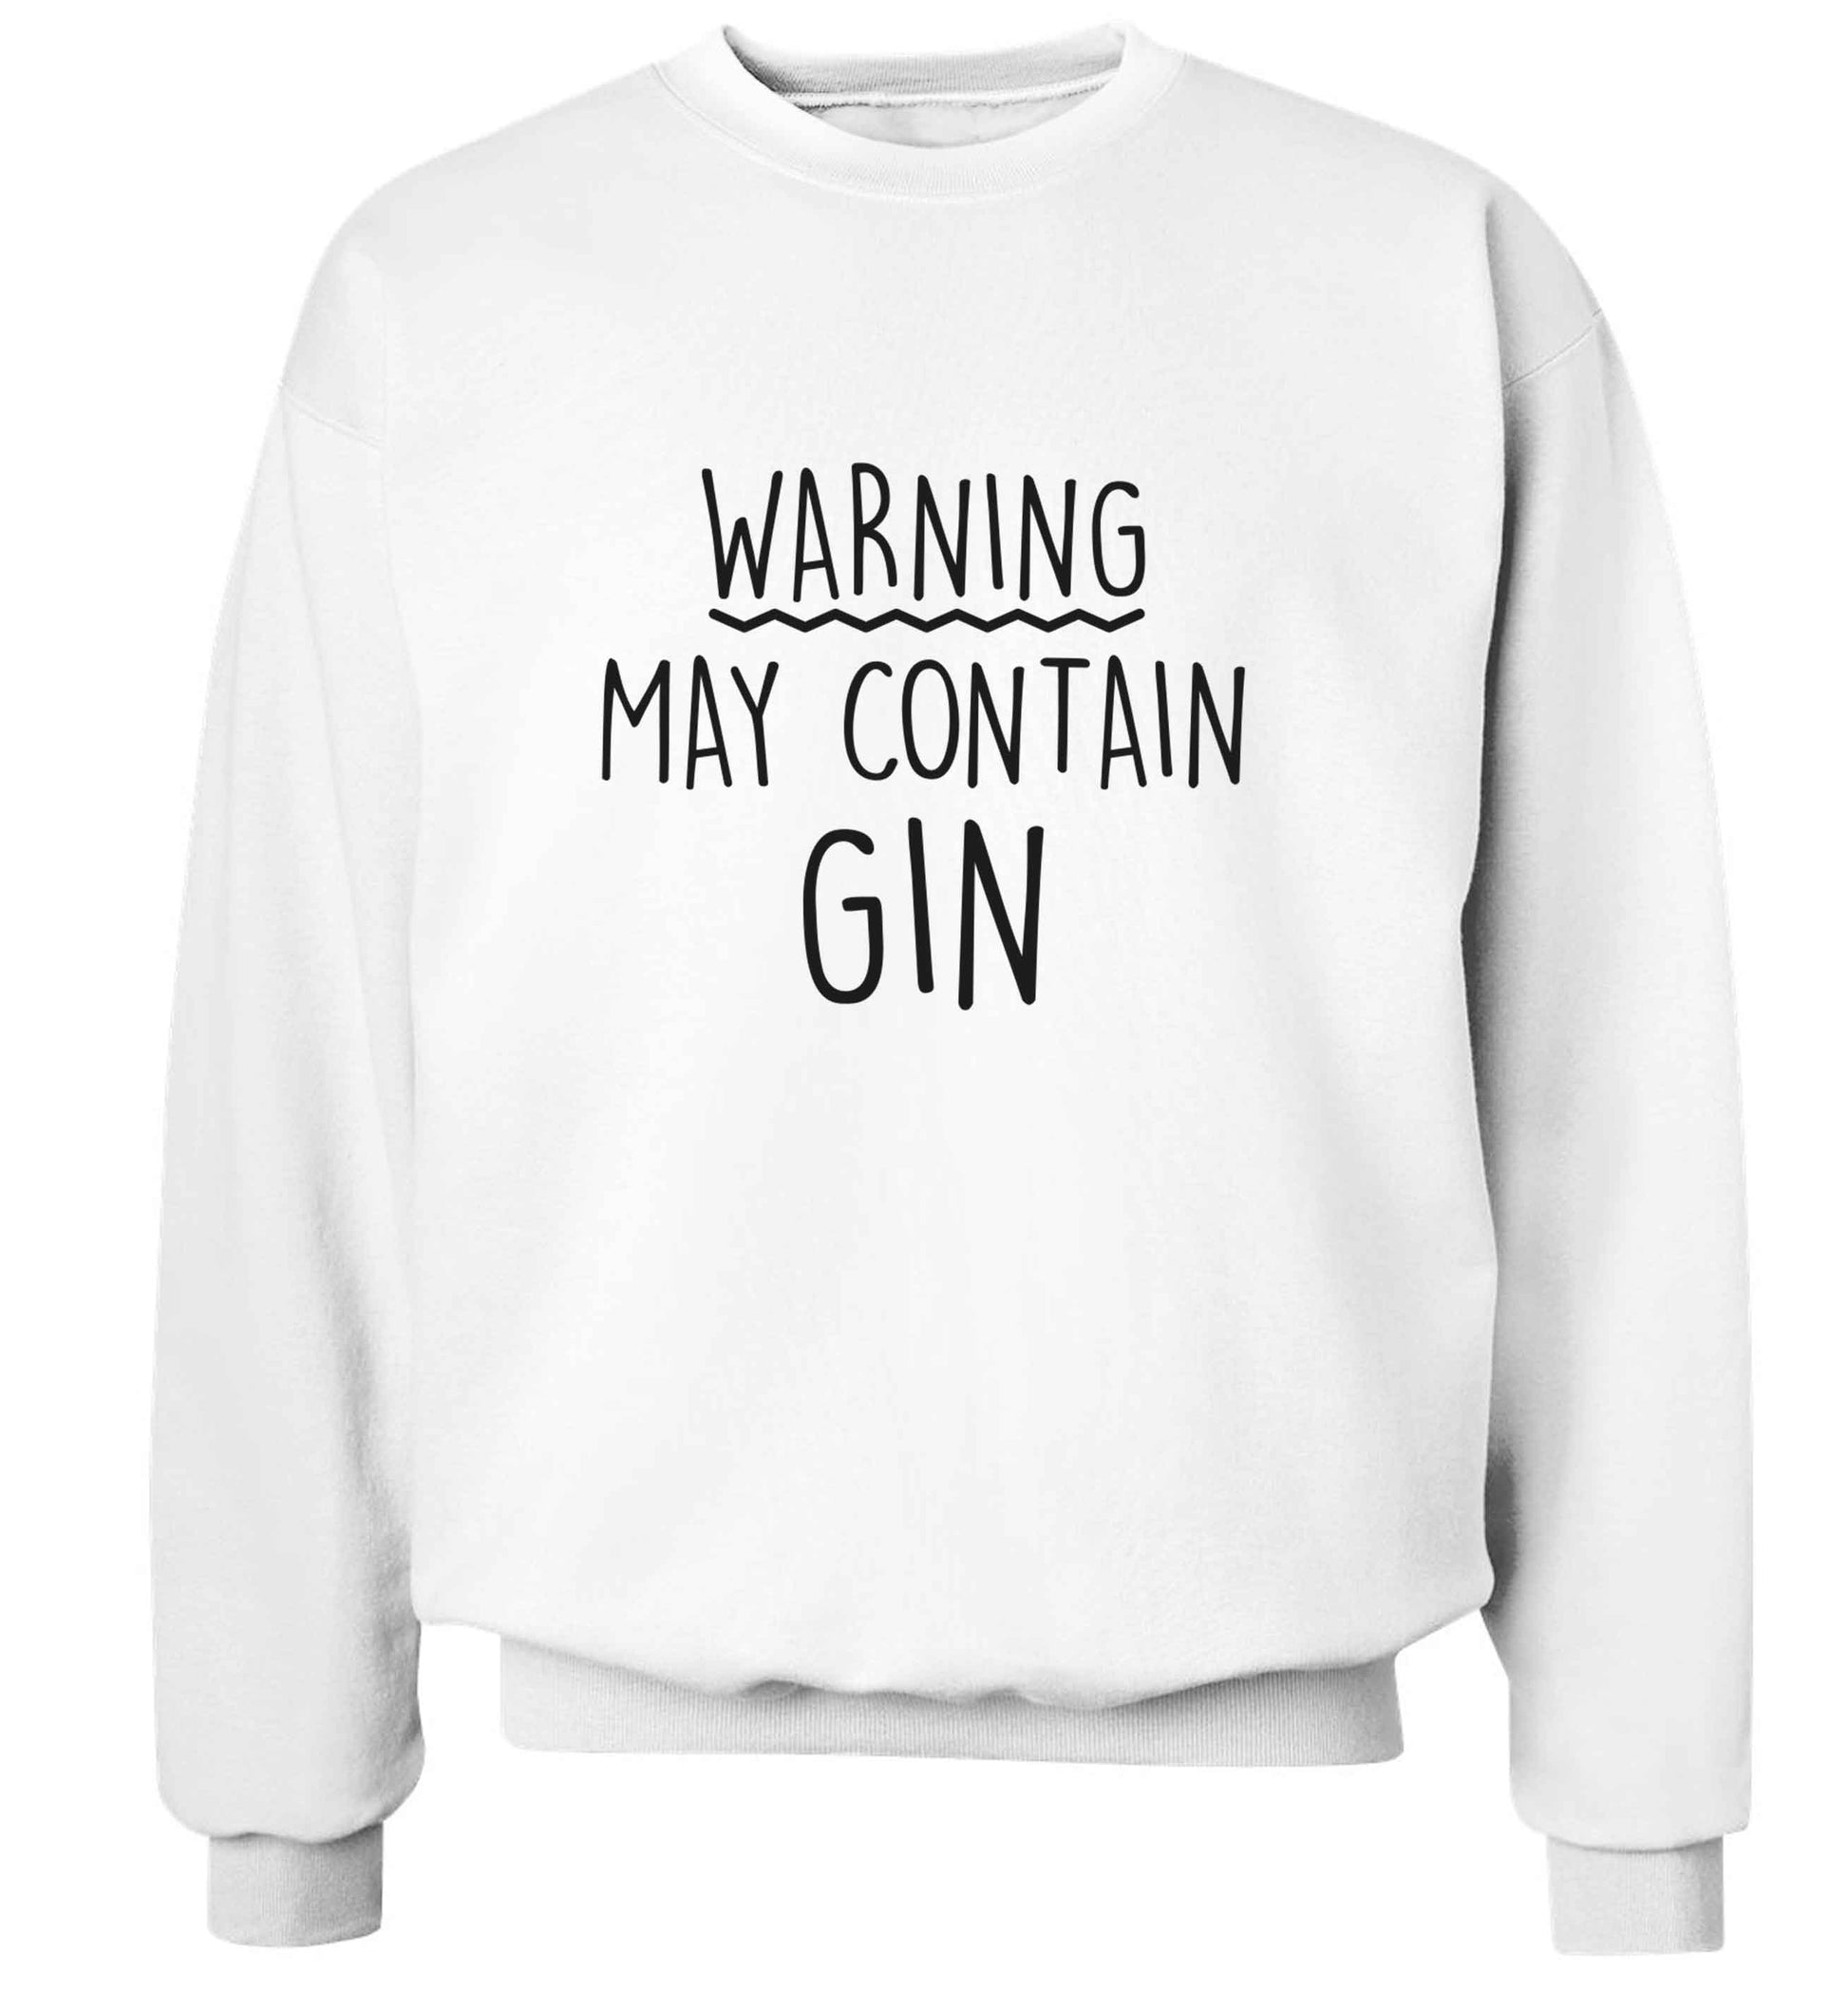 Warning may contain gin adult's unisex white sweater 2XL